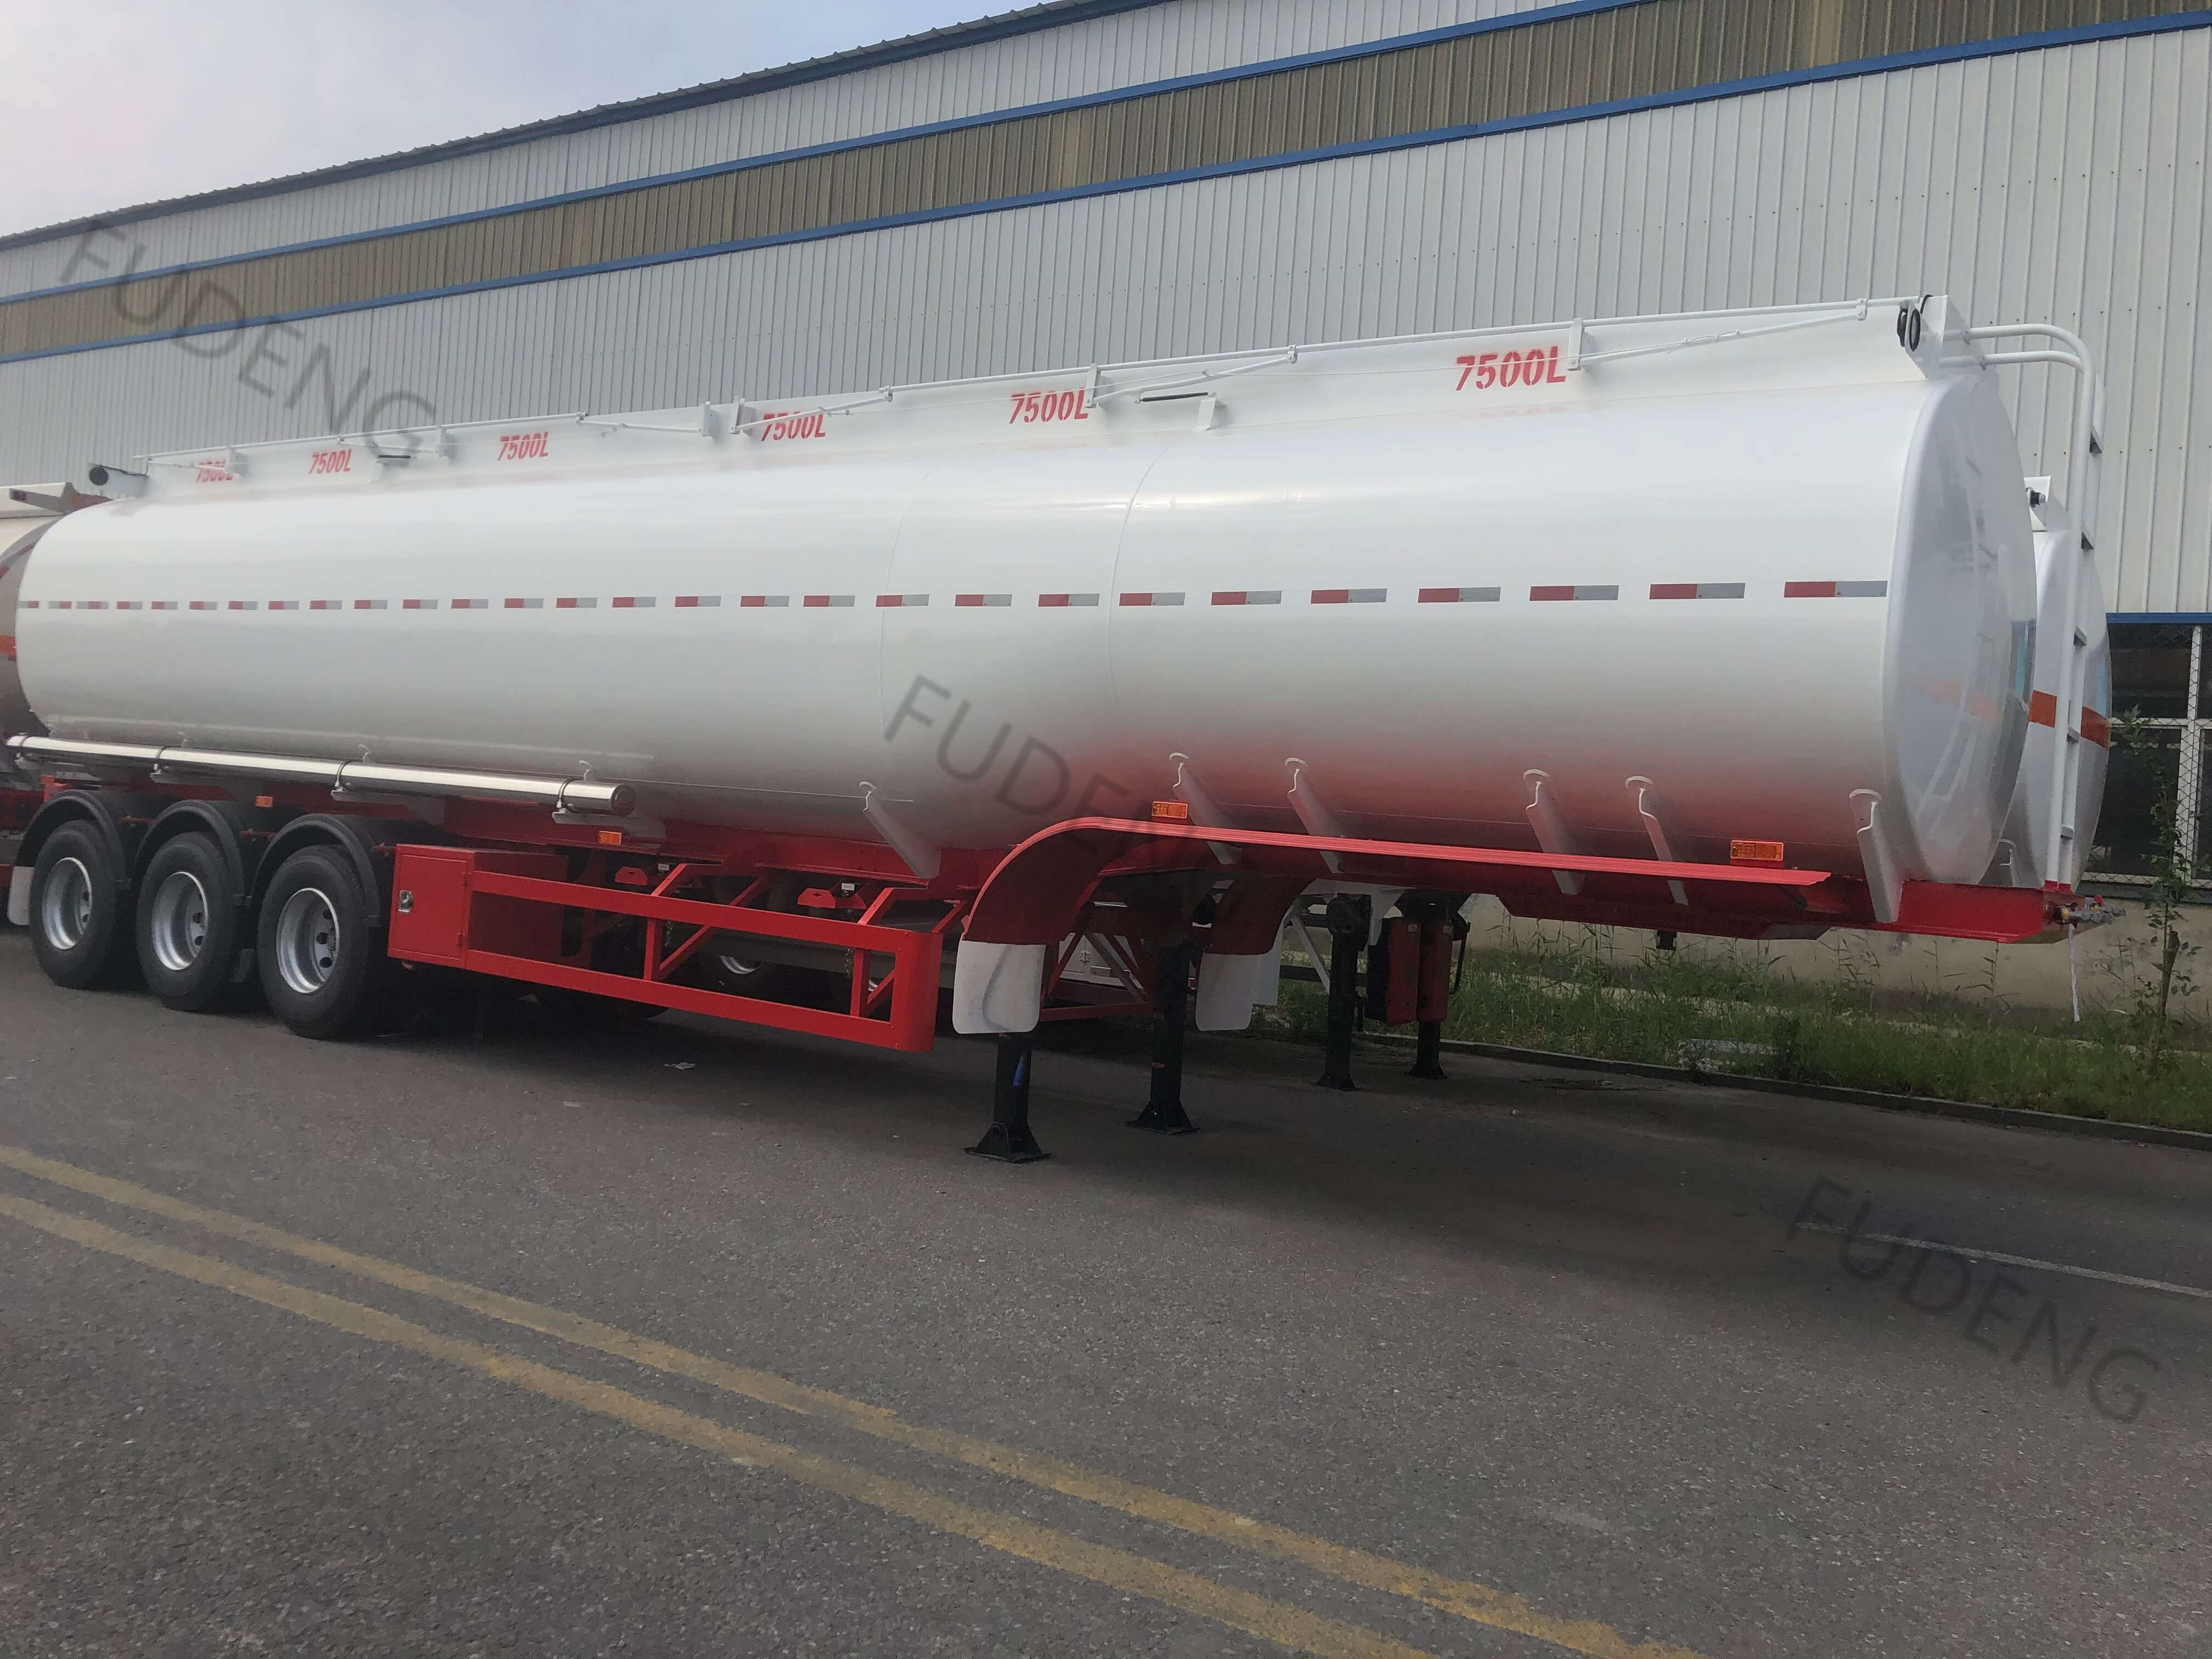 How To Save Oil When Use The Fuel Tanker Trailer?